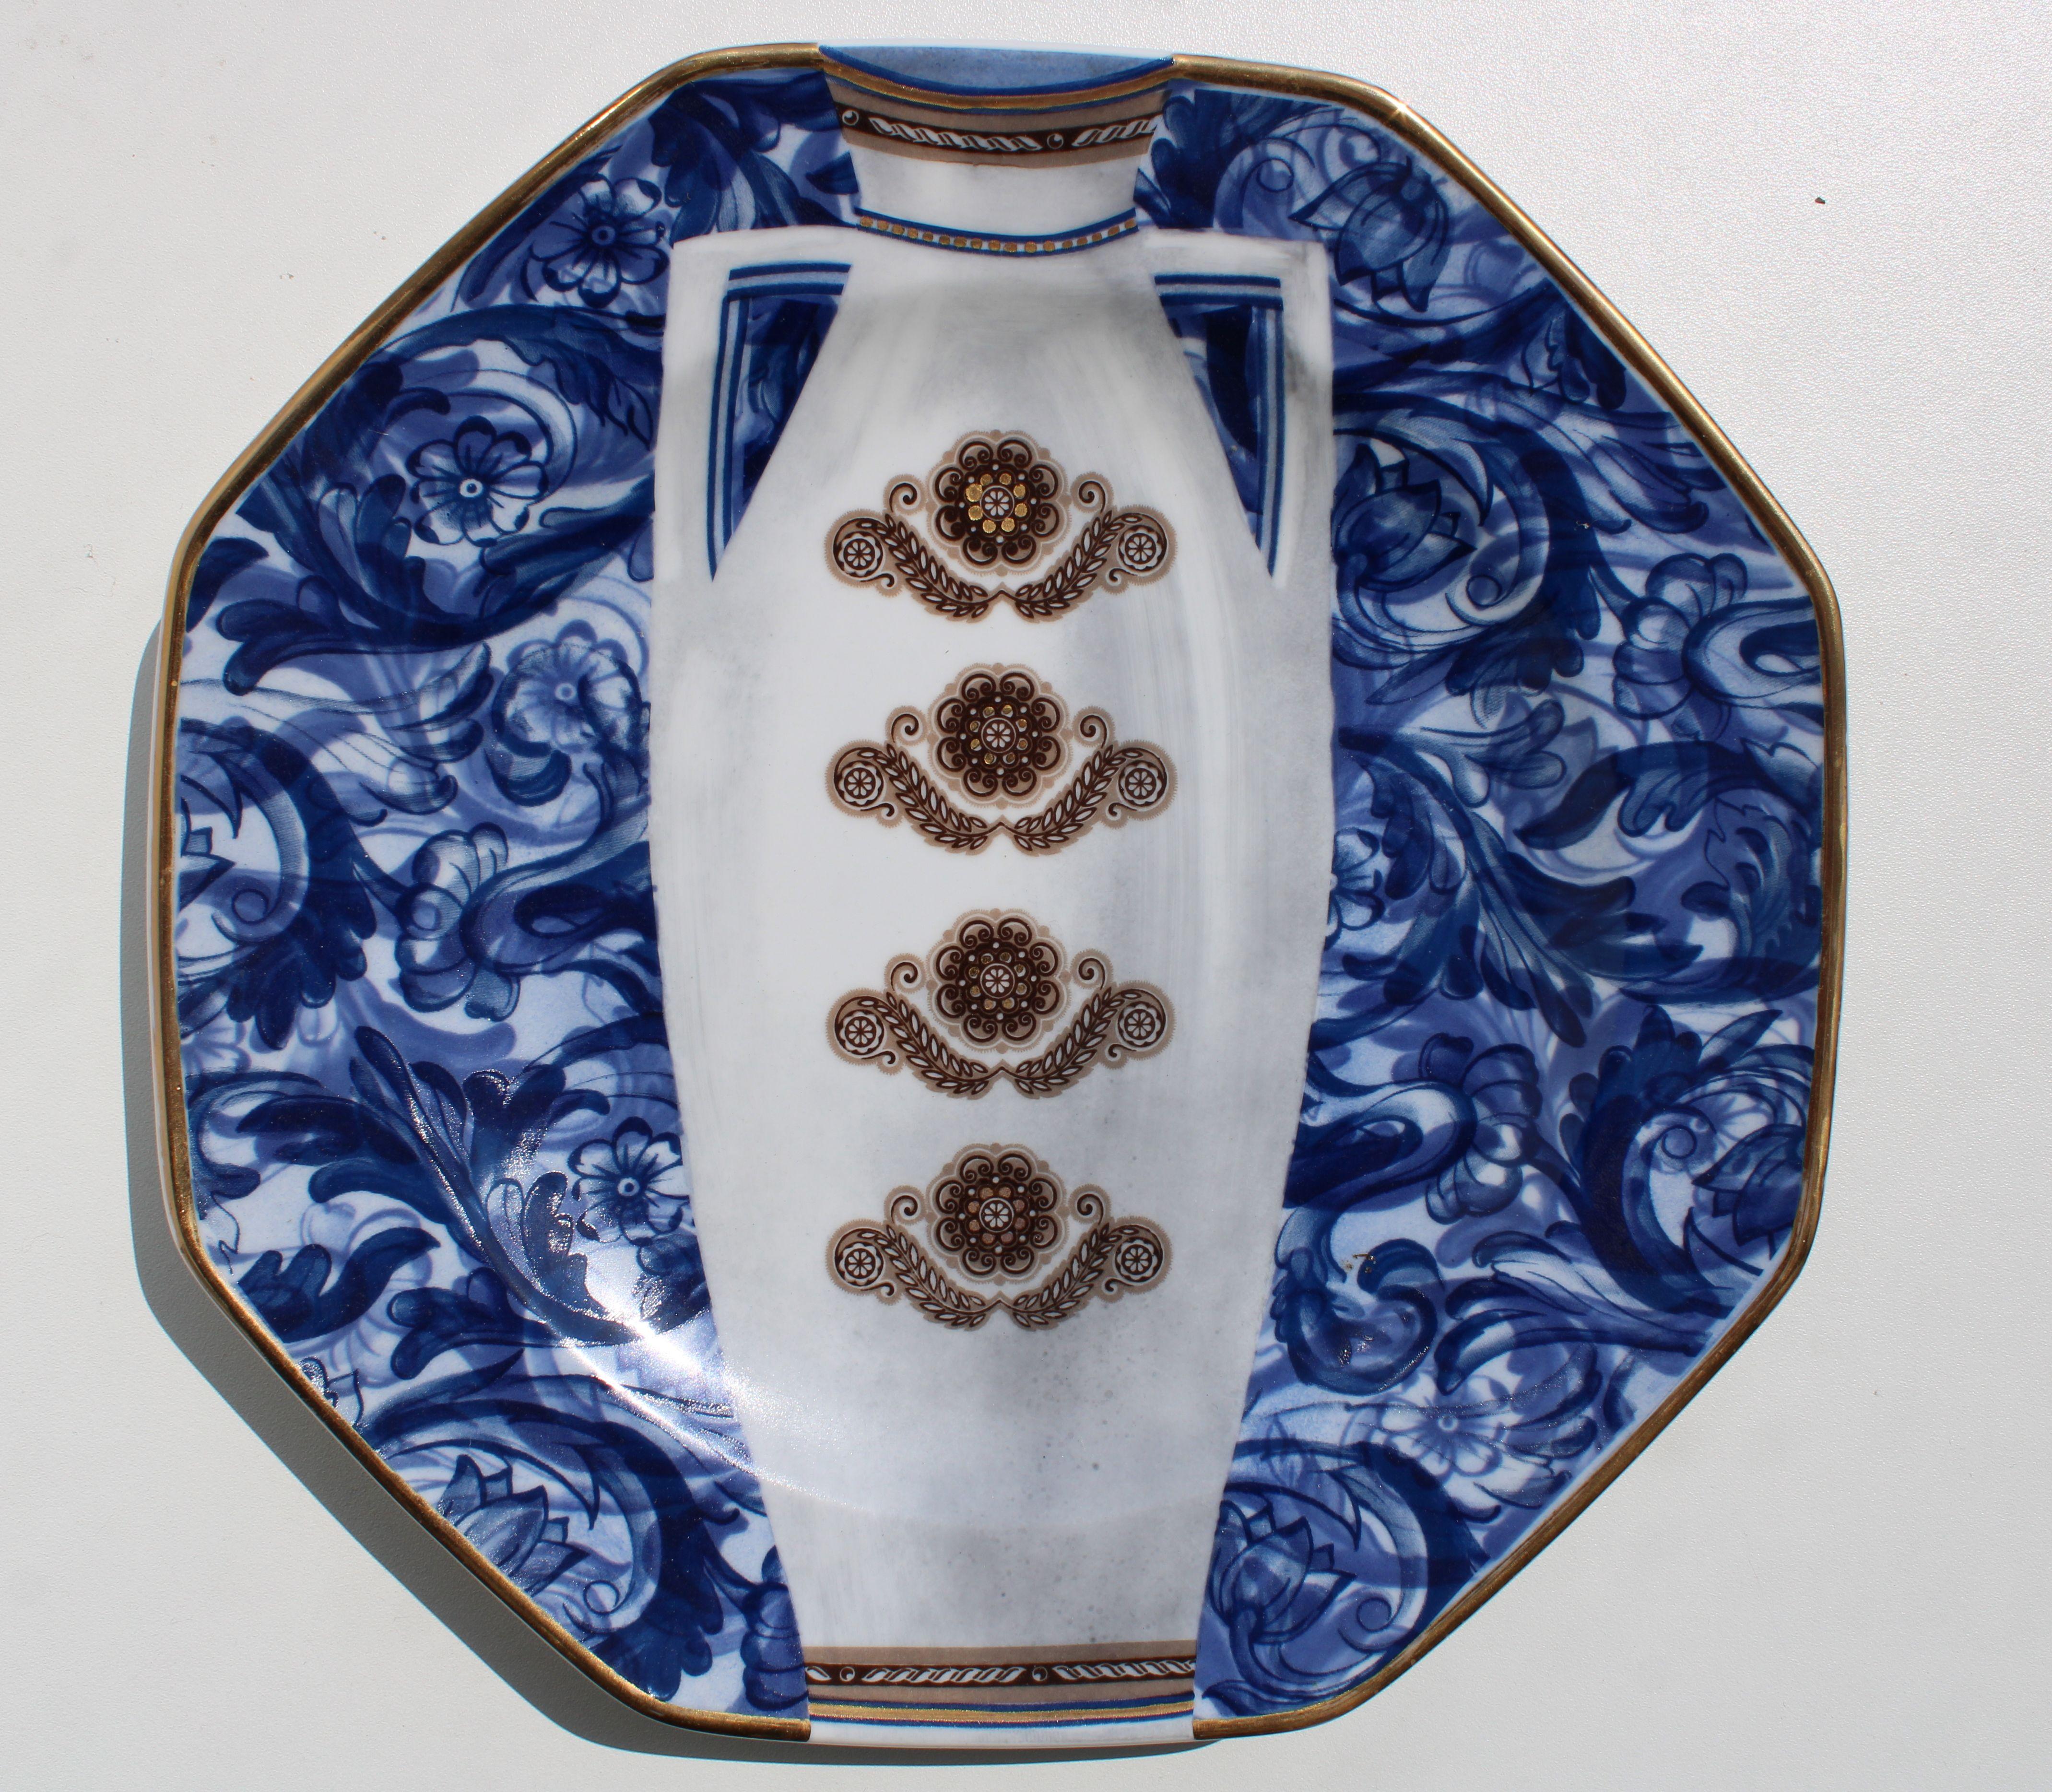 Plates with the motive of Holland  Porcelain, diam. 31 cm (3 pieces set) - Modern Sculpture by Inese Brants